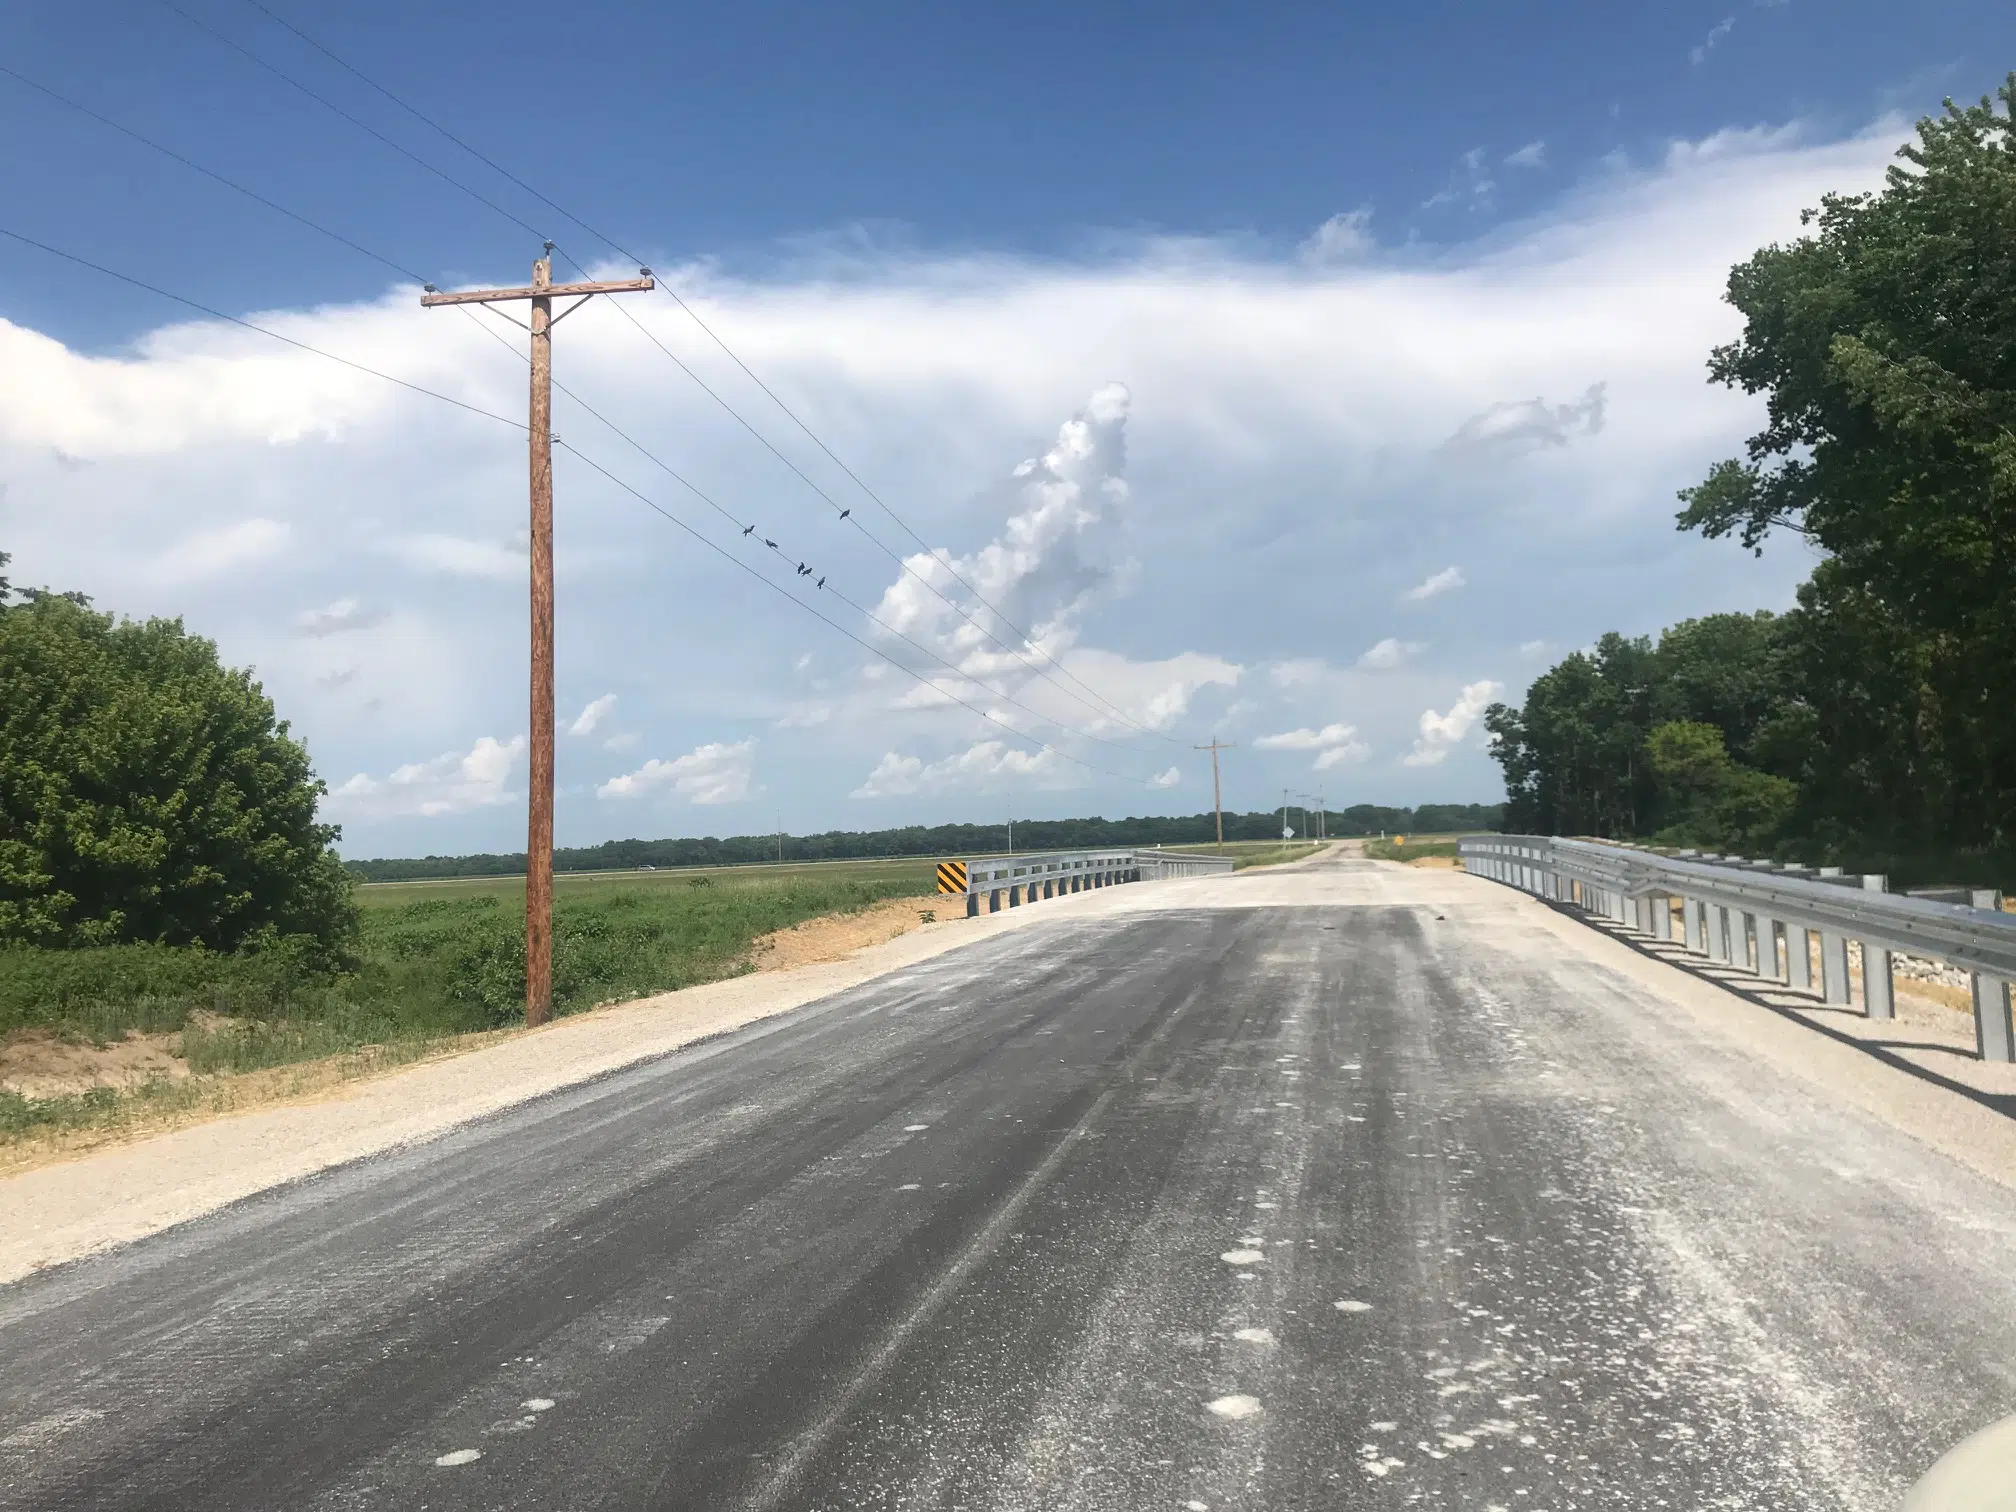 Thrill Hill Bridge is now back open